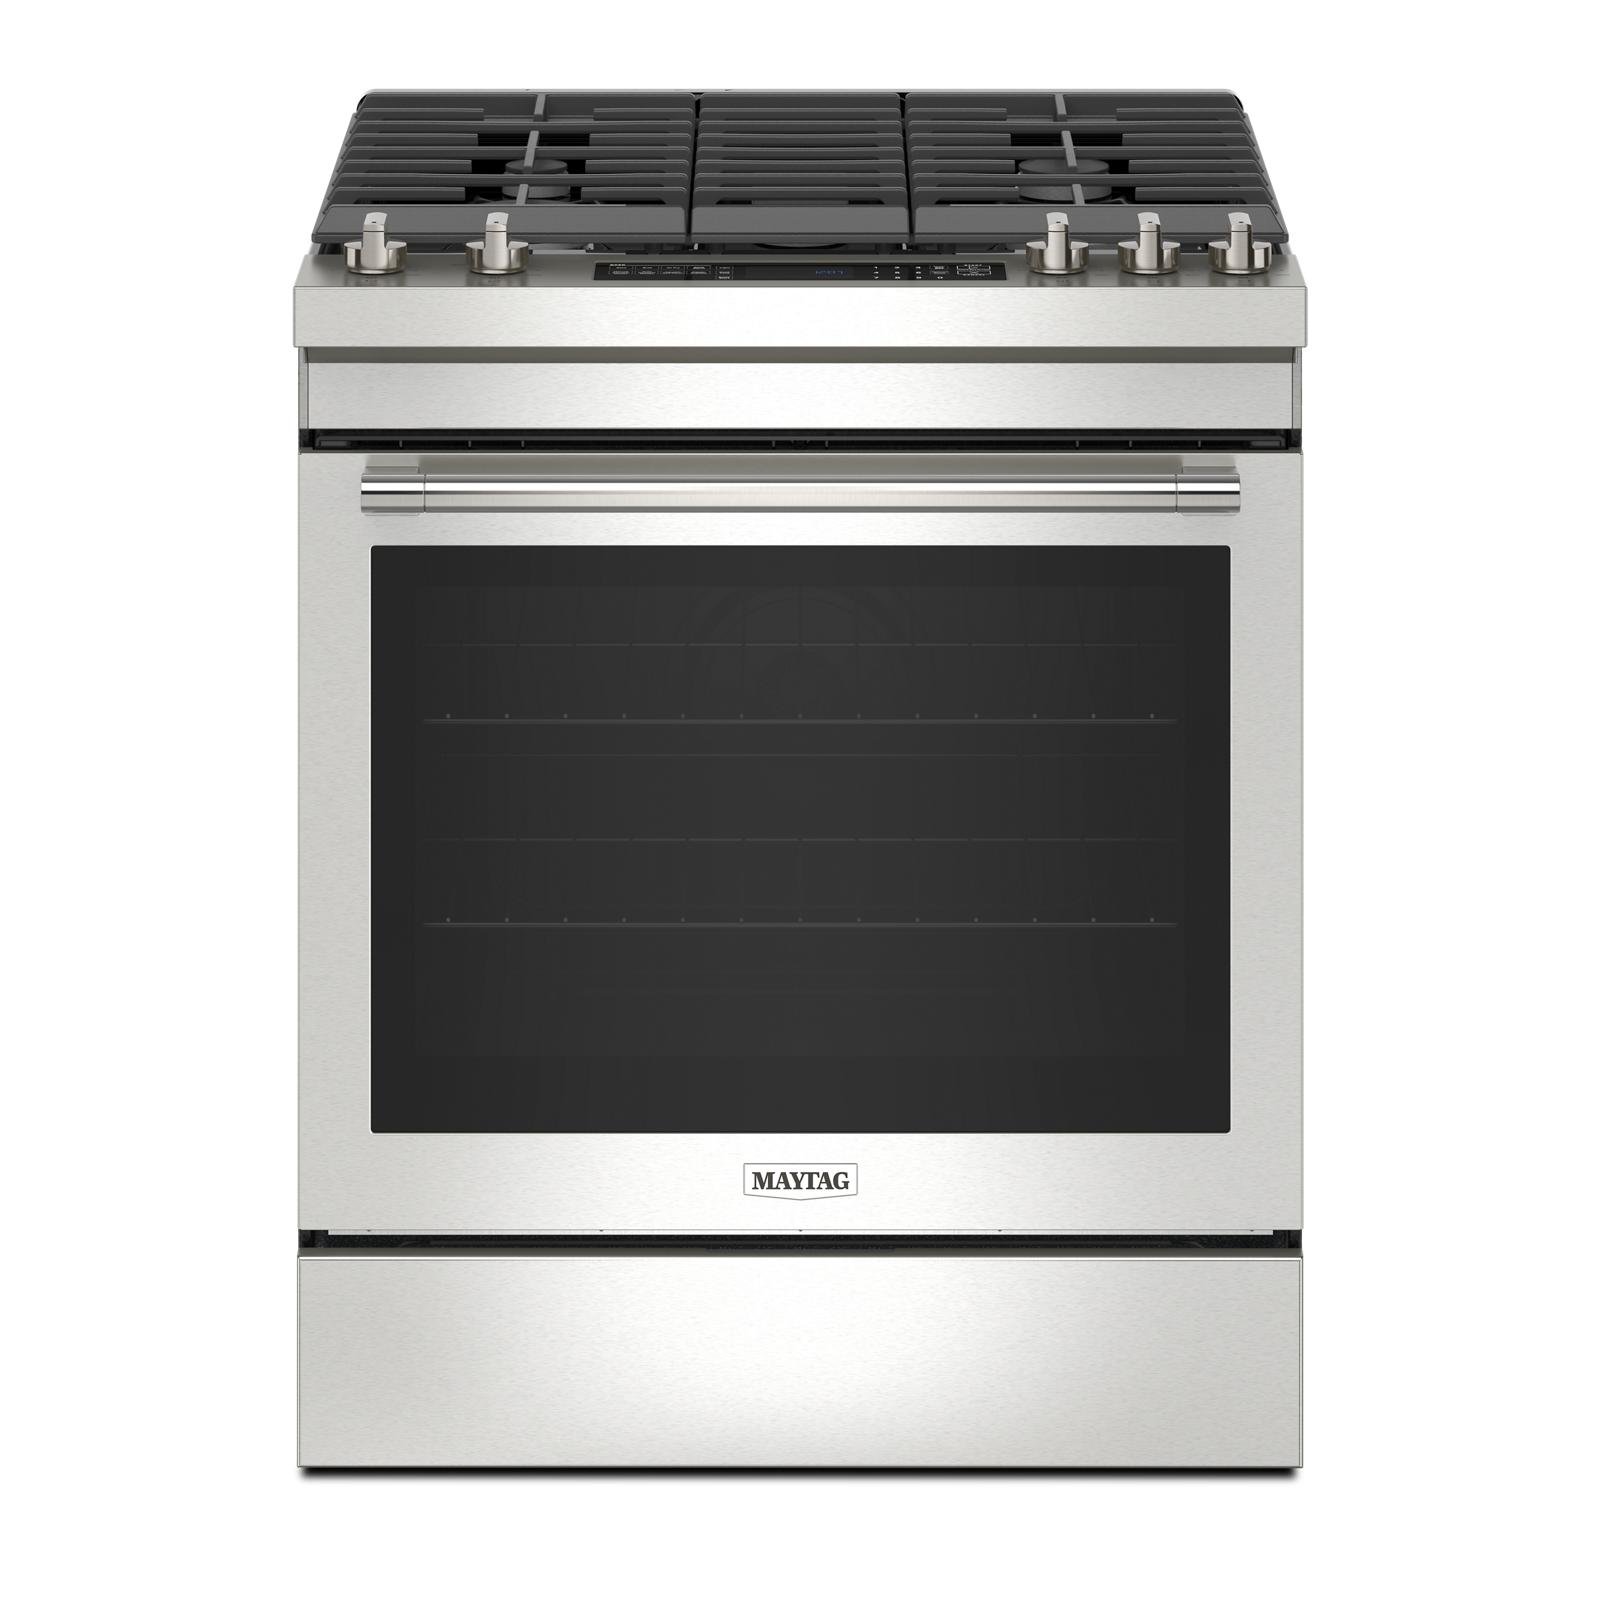 Maytag - 5.8 cu. ft  Gas Range in Stainless - MGS8800PZ